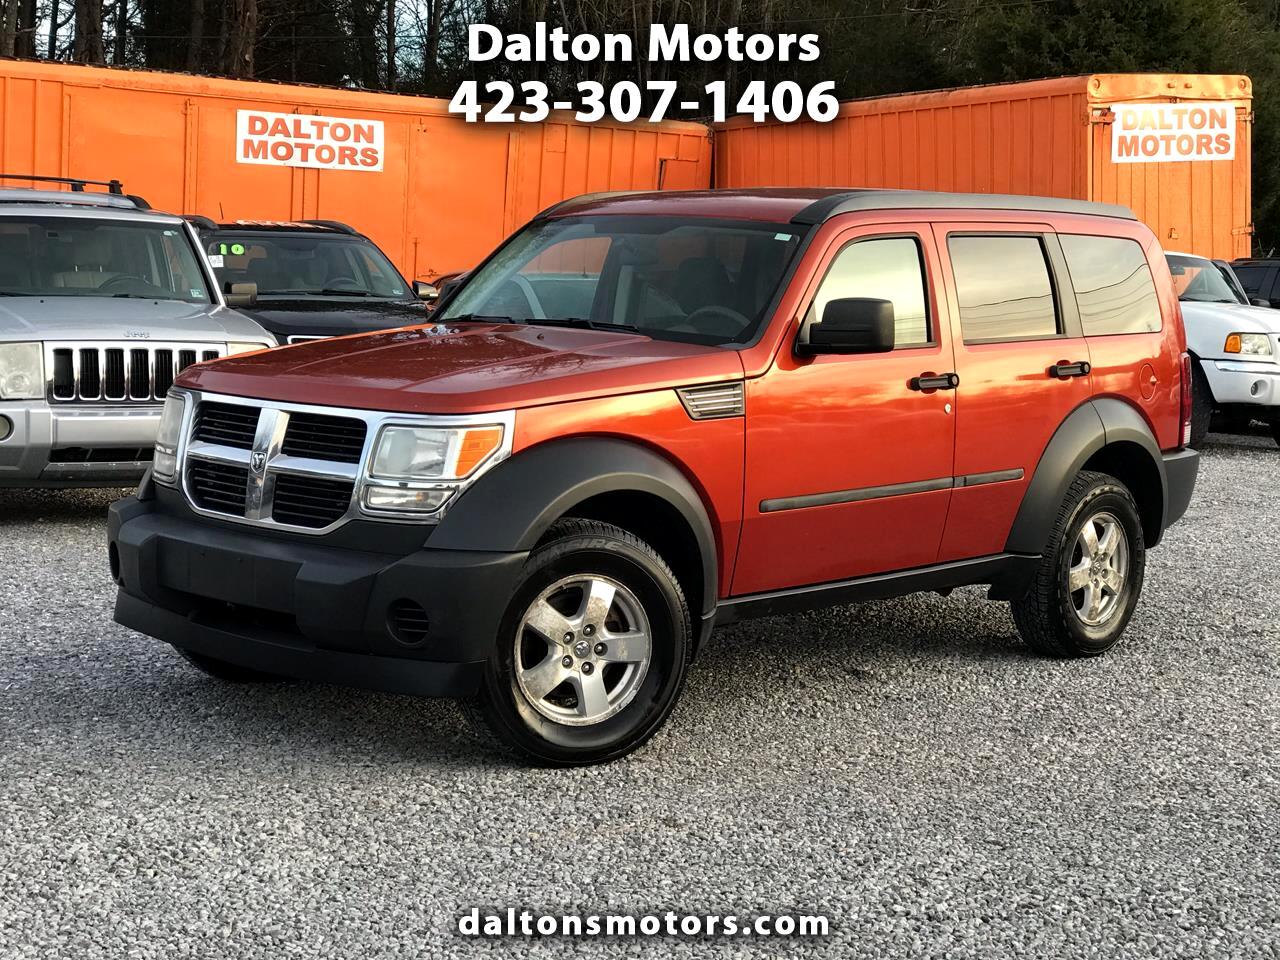 Buy Here Pay Here 2007 Dodge Nitro SXT 4WD for Sale in Morristown TN 